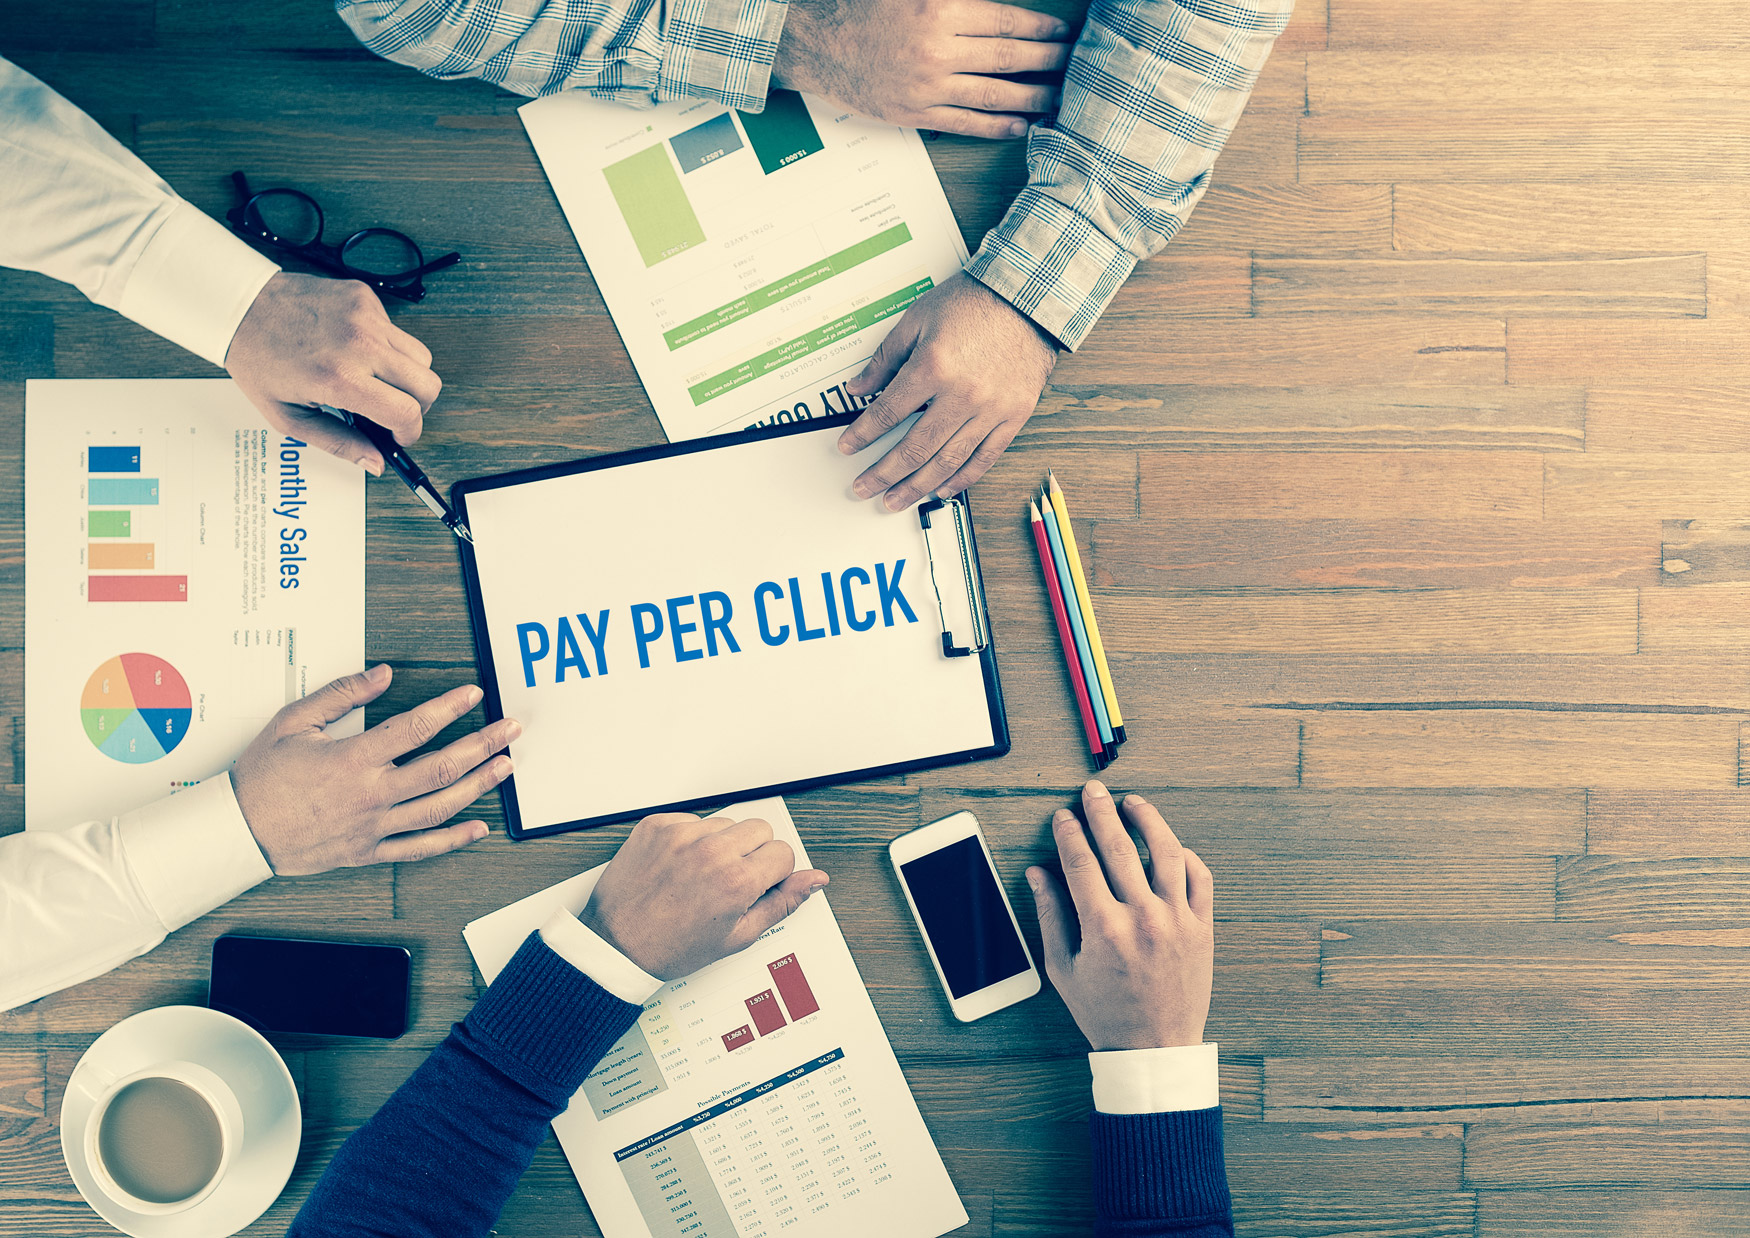 6 Tips for More Effective PPC Campaigns